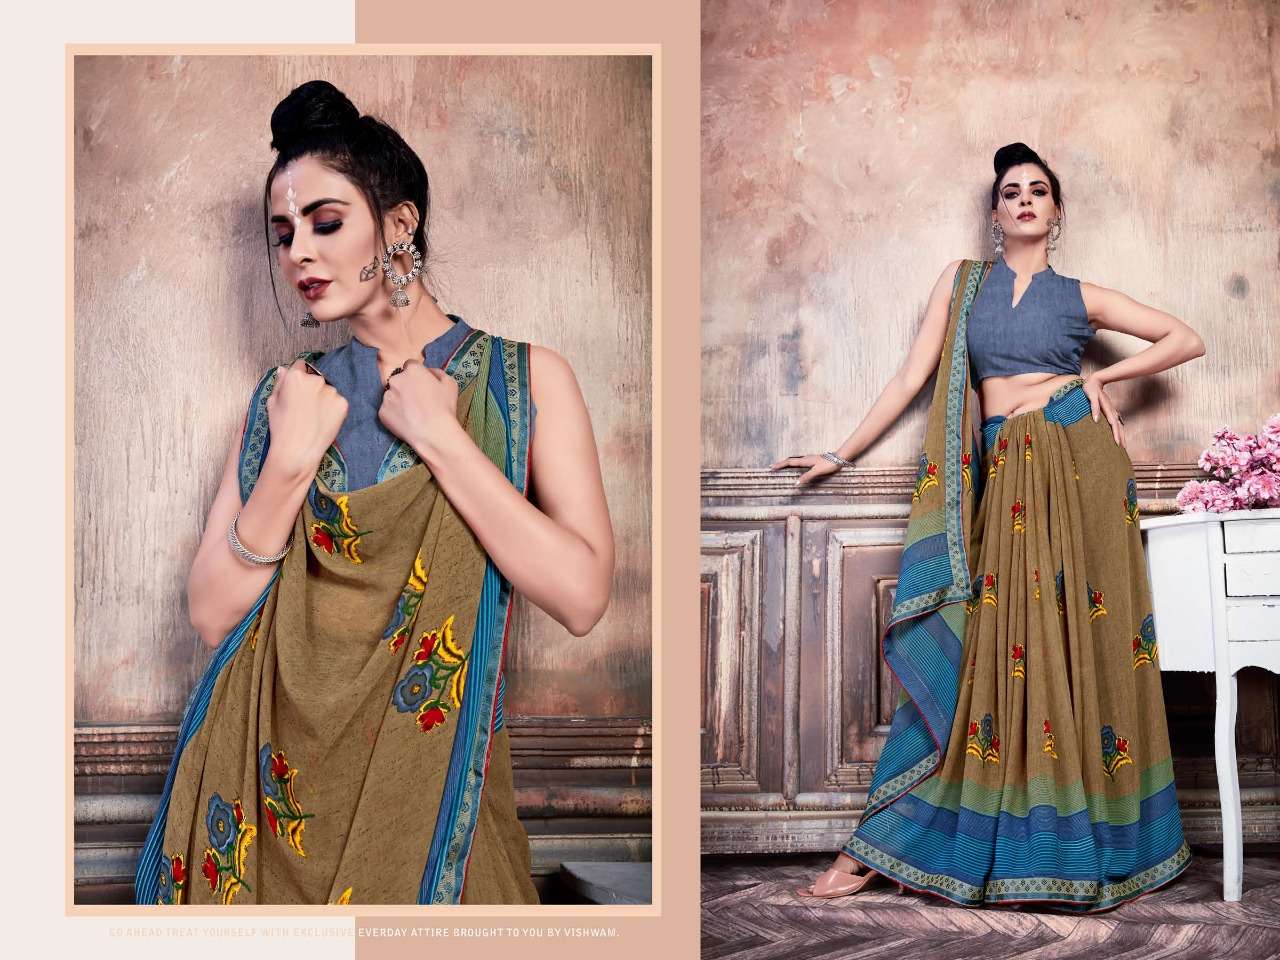 STARWALK BY RACHANA 68001 TO 68010 SERIES INDIAN TRADITIONAL WEAR COLLECTION BEAUTIFUL STYLISH FANCY COLORFUL PARTY WEAR & OCCASIONAL WEAR WEIGHTLESS SAREES AT WHOLESALE PRICE